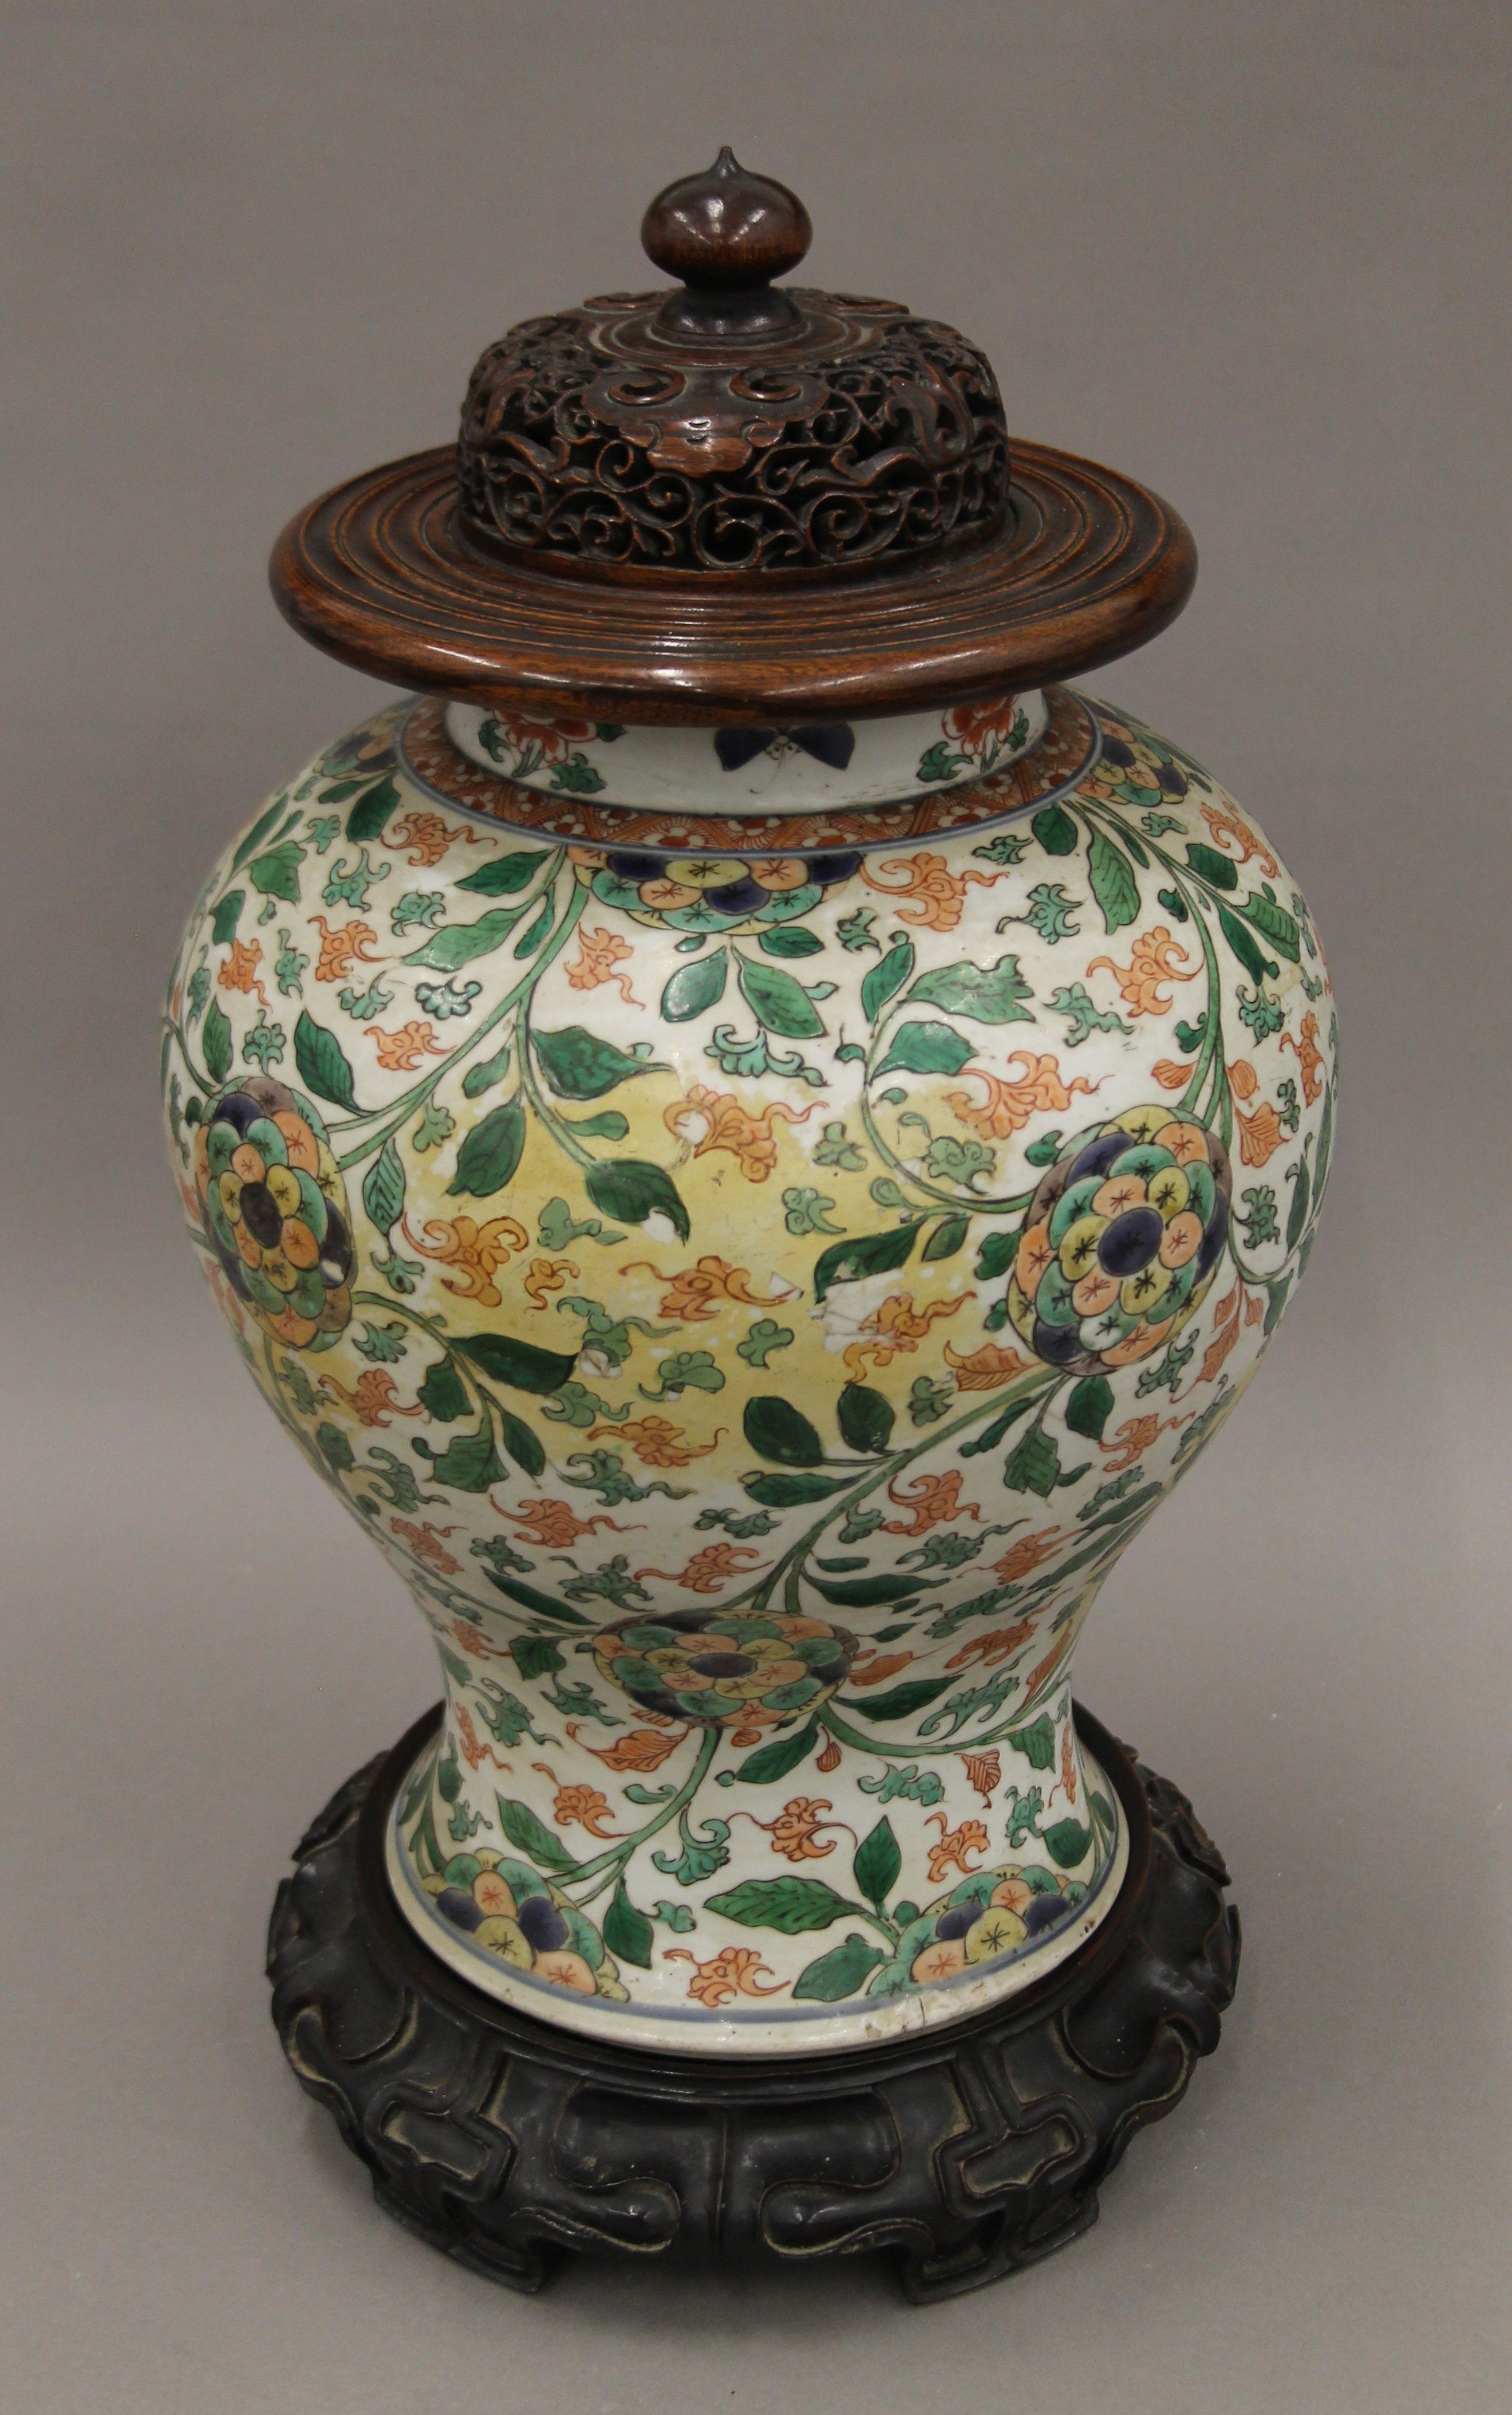 A 18th/19th century Chinese porcelain vase with pierced wooden lid and carved wooden stand.